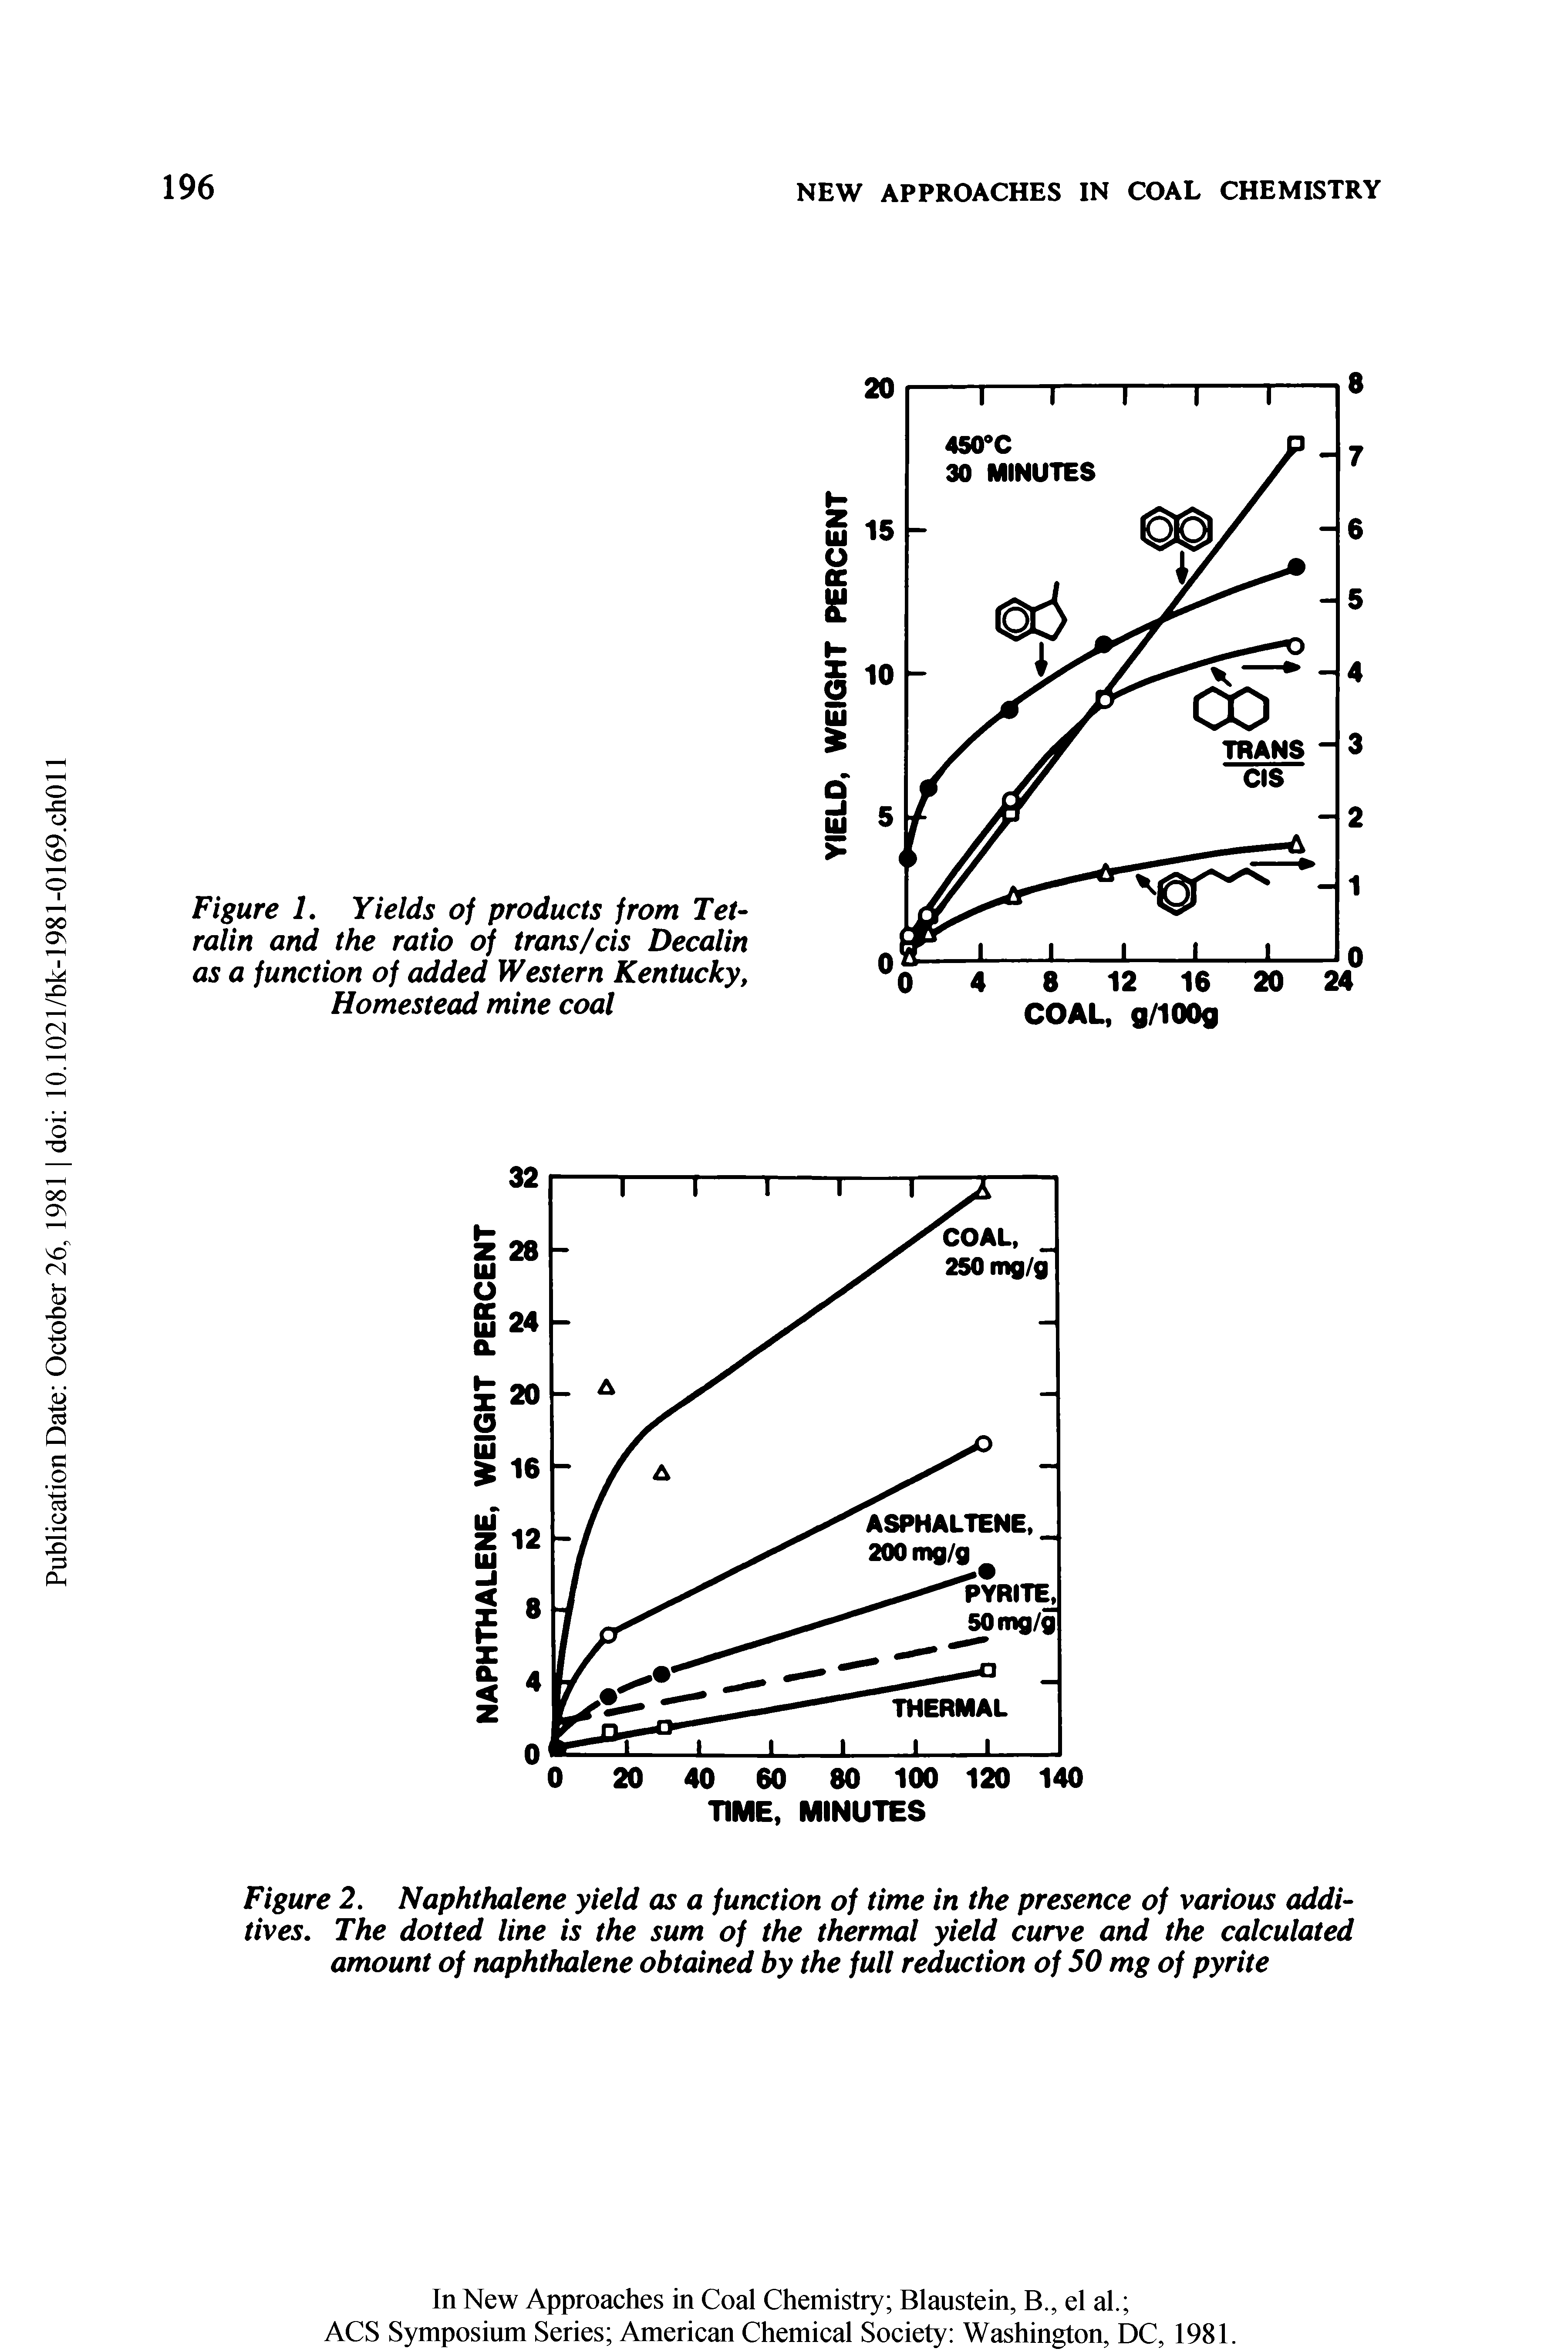 Figure 2. Naphthalene yield as a function of time in the presence of various additives. The dotted line is the sum of the thermal yield curve and the calculated amount of naphthalene obtained by the full reduction of 50 mg of pyrite...